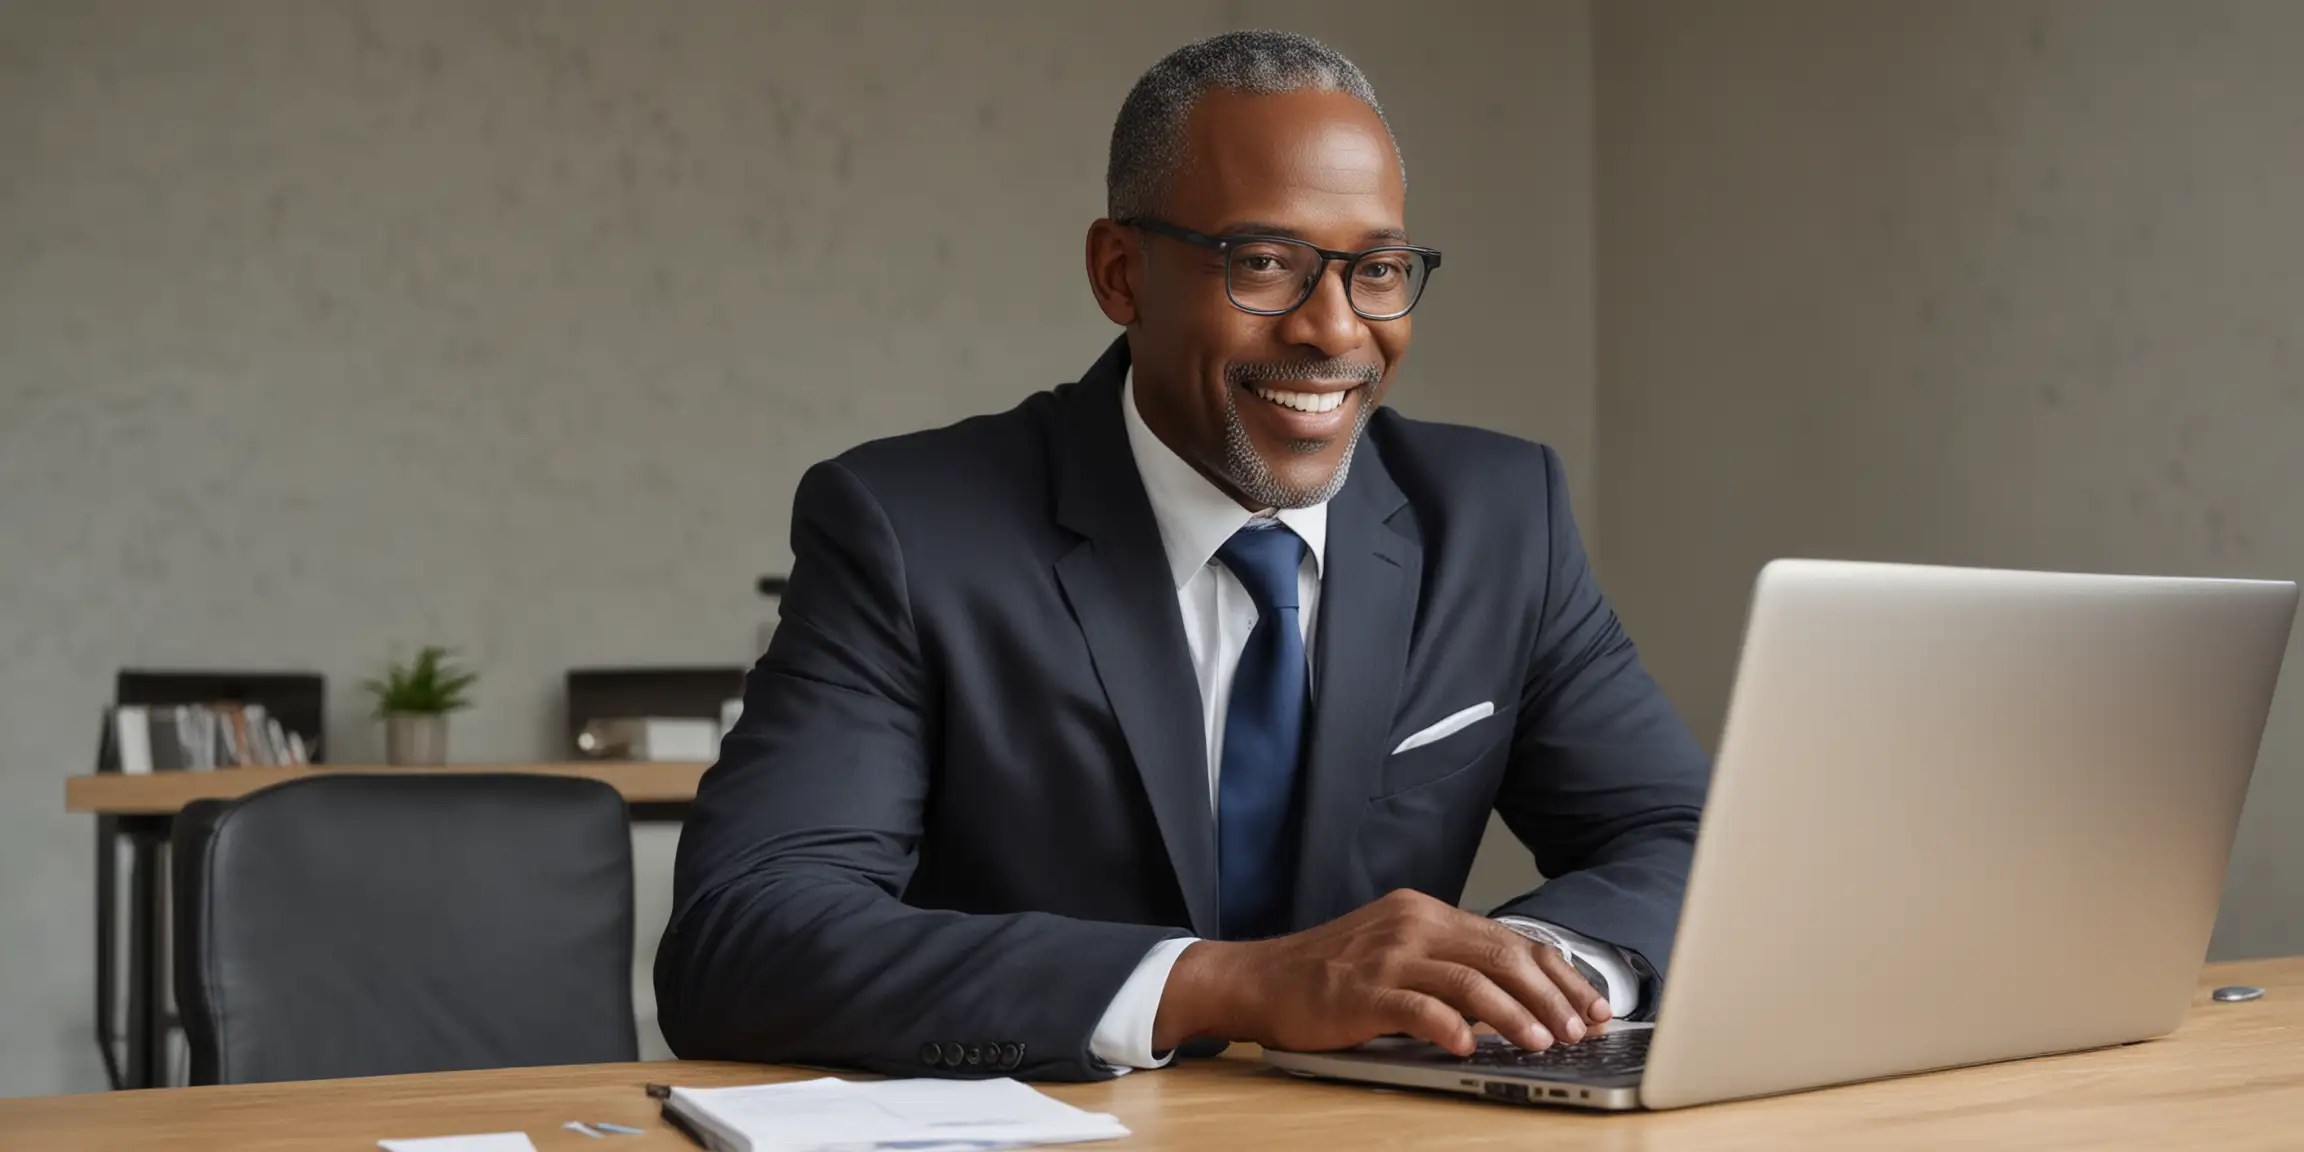 Professional Black Male Working on Website in Stylish Suit